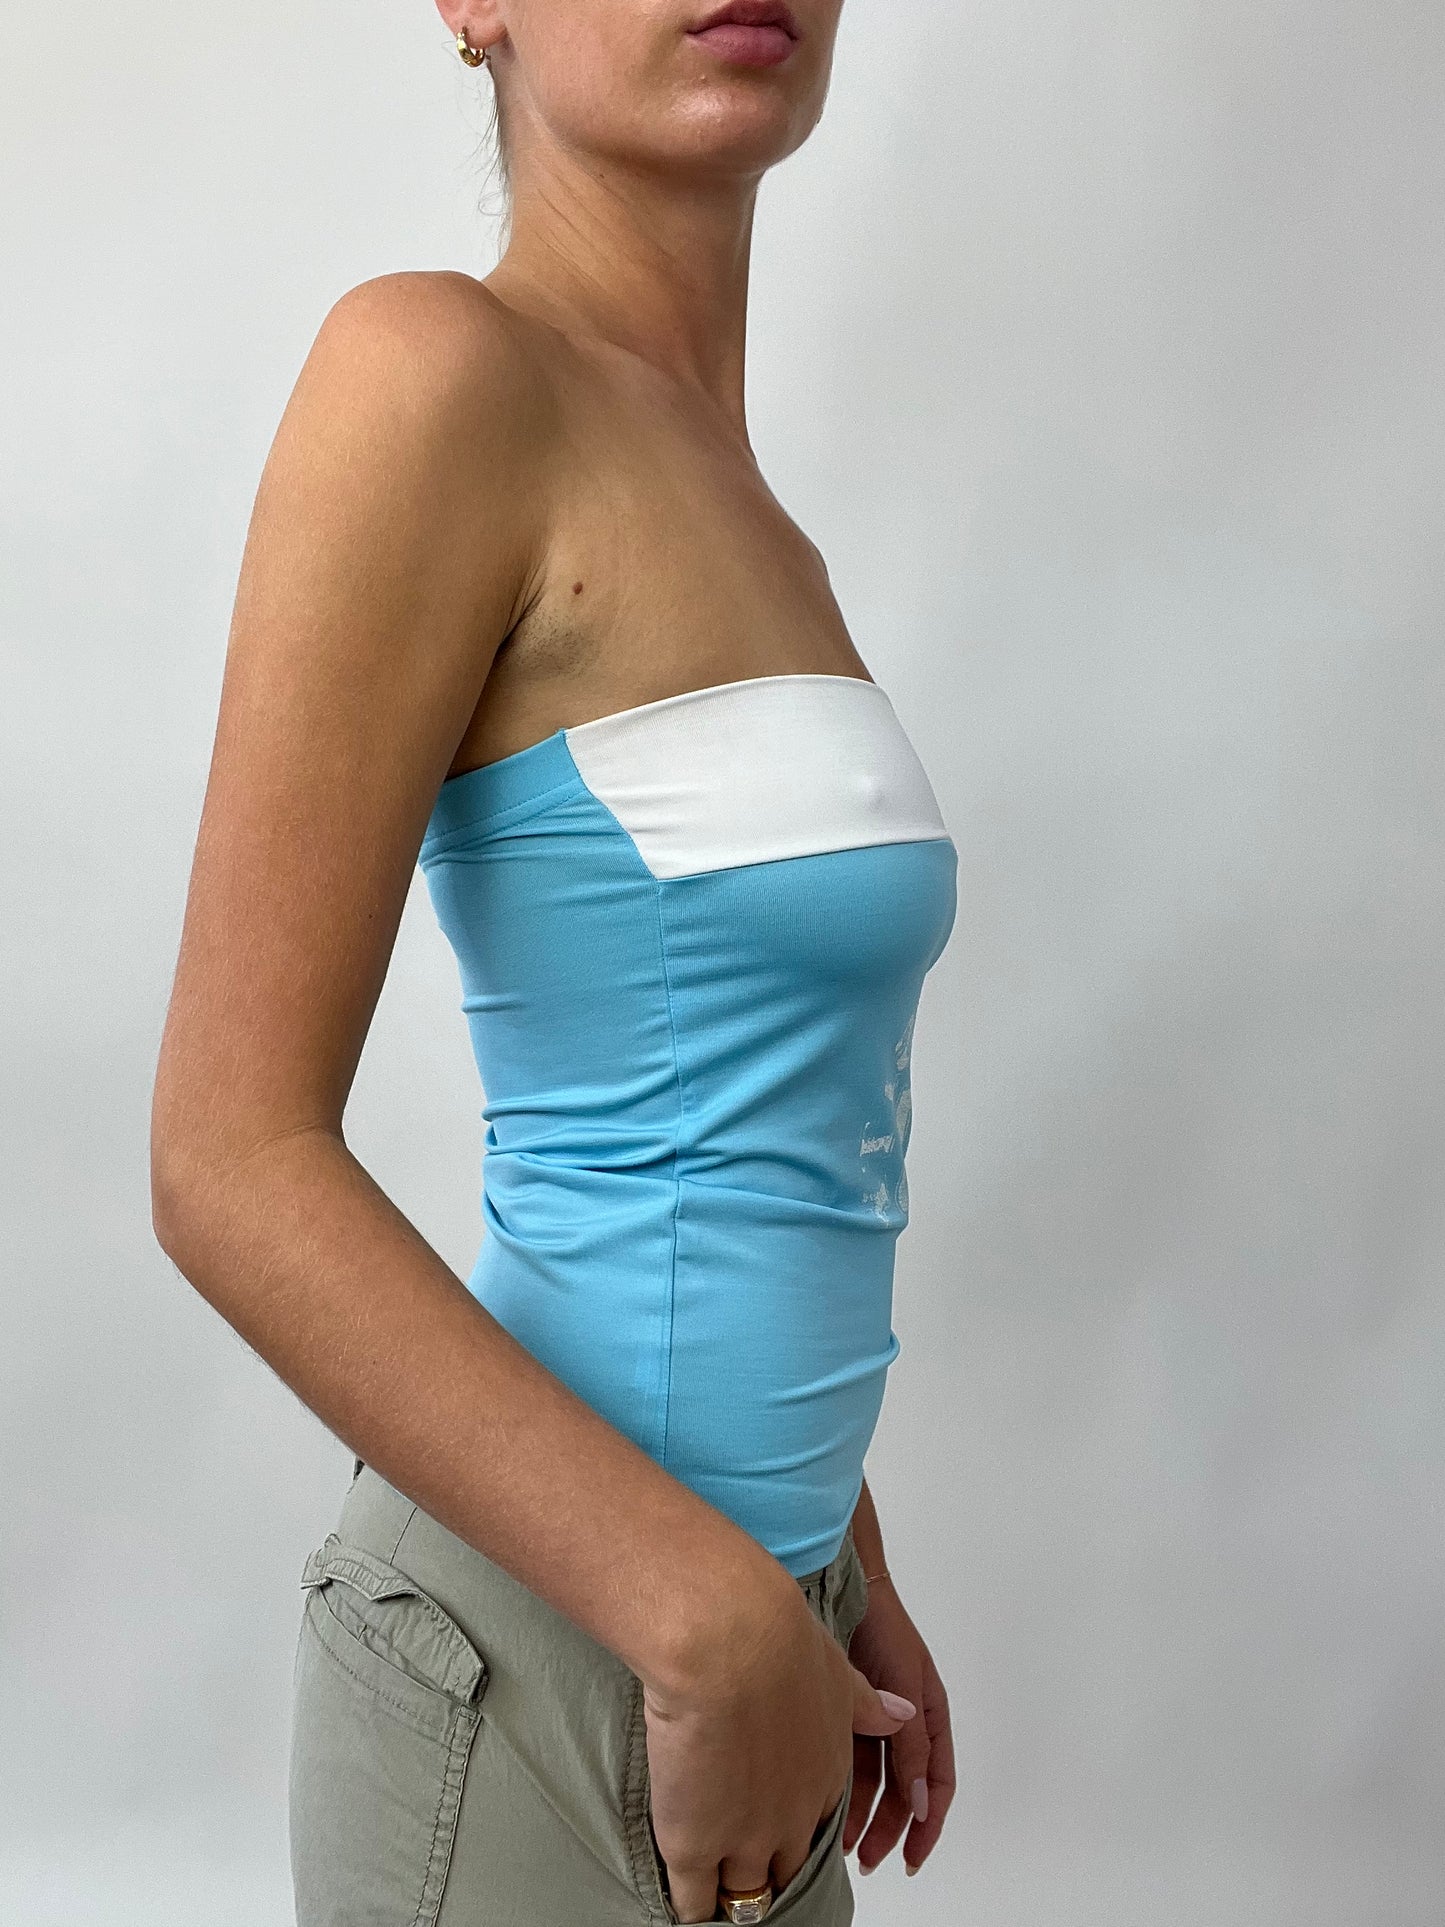 PUB GARDEN DROP | small blue and white sporty bandeau